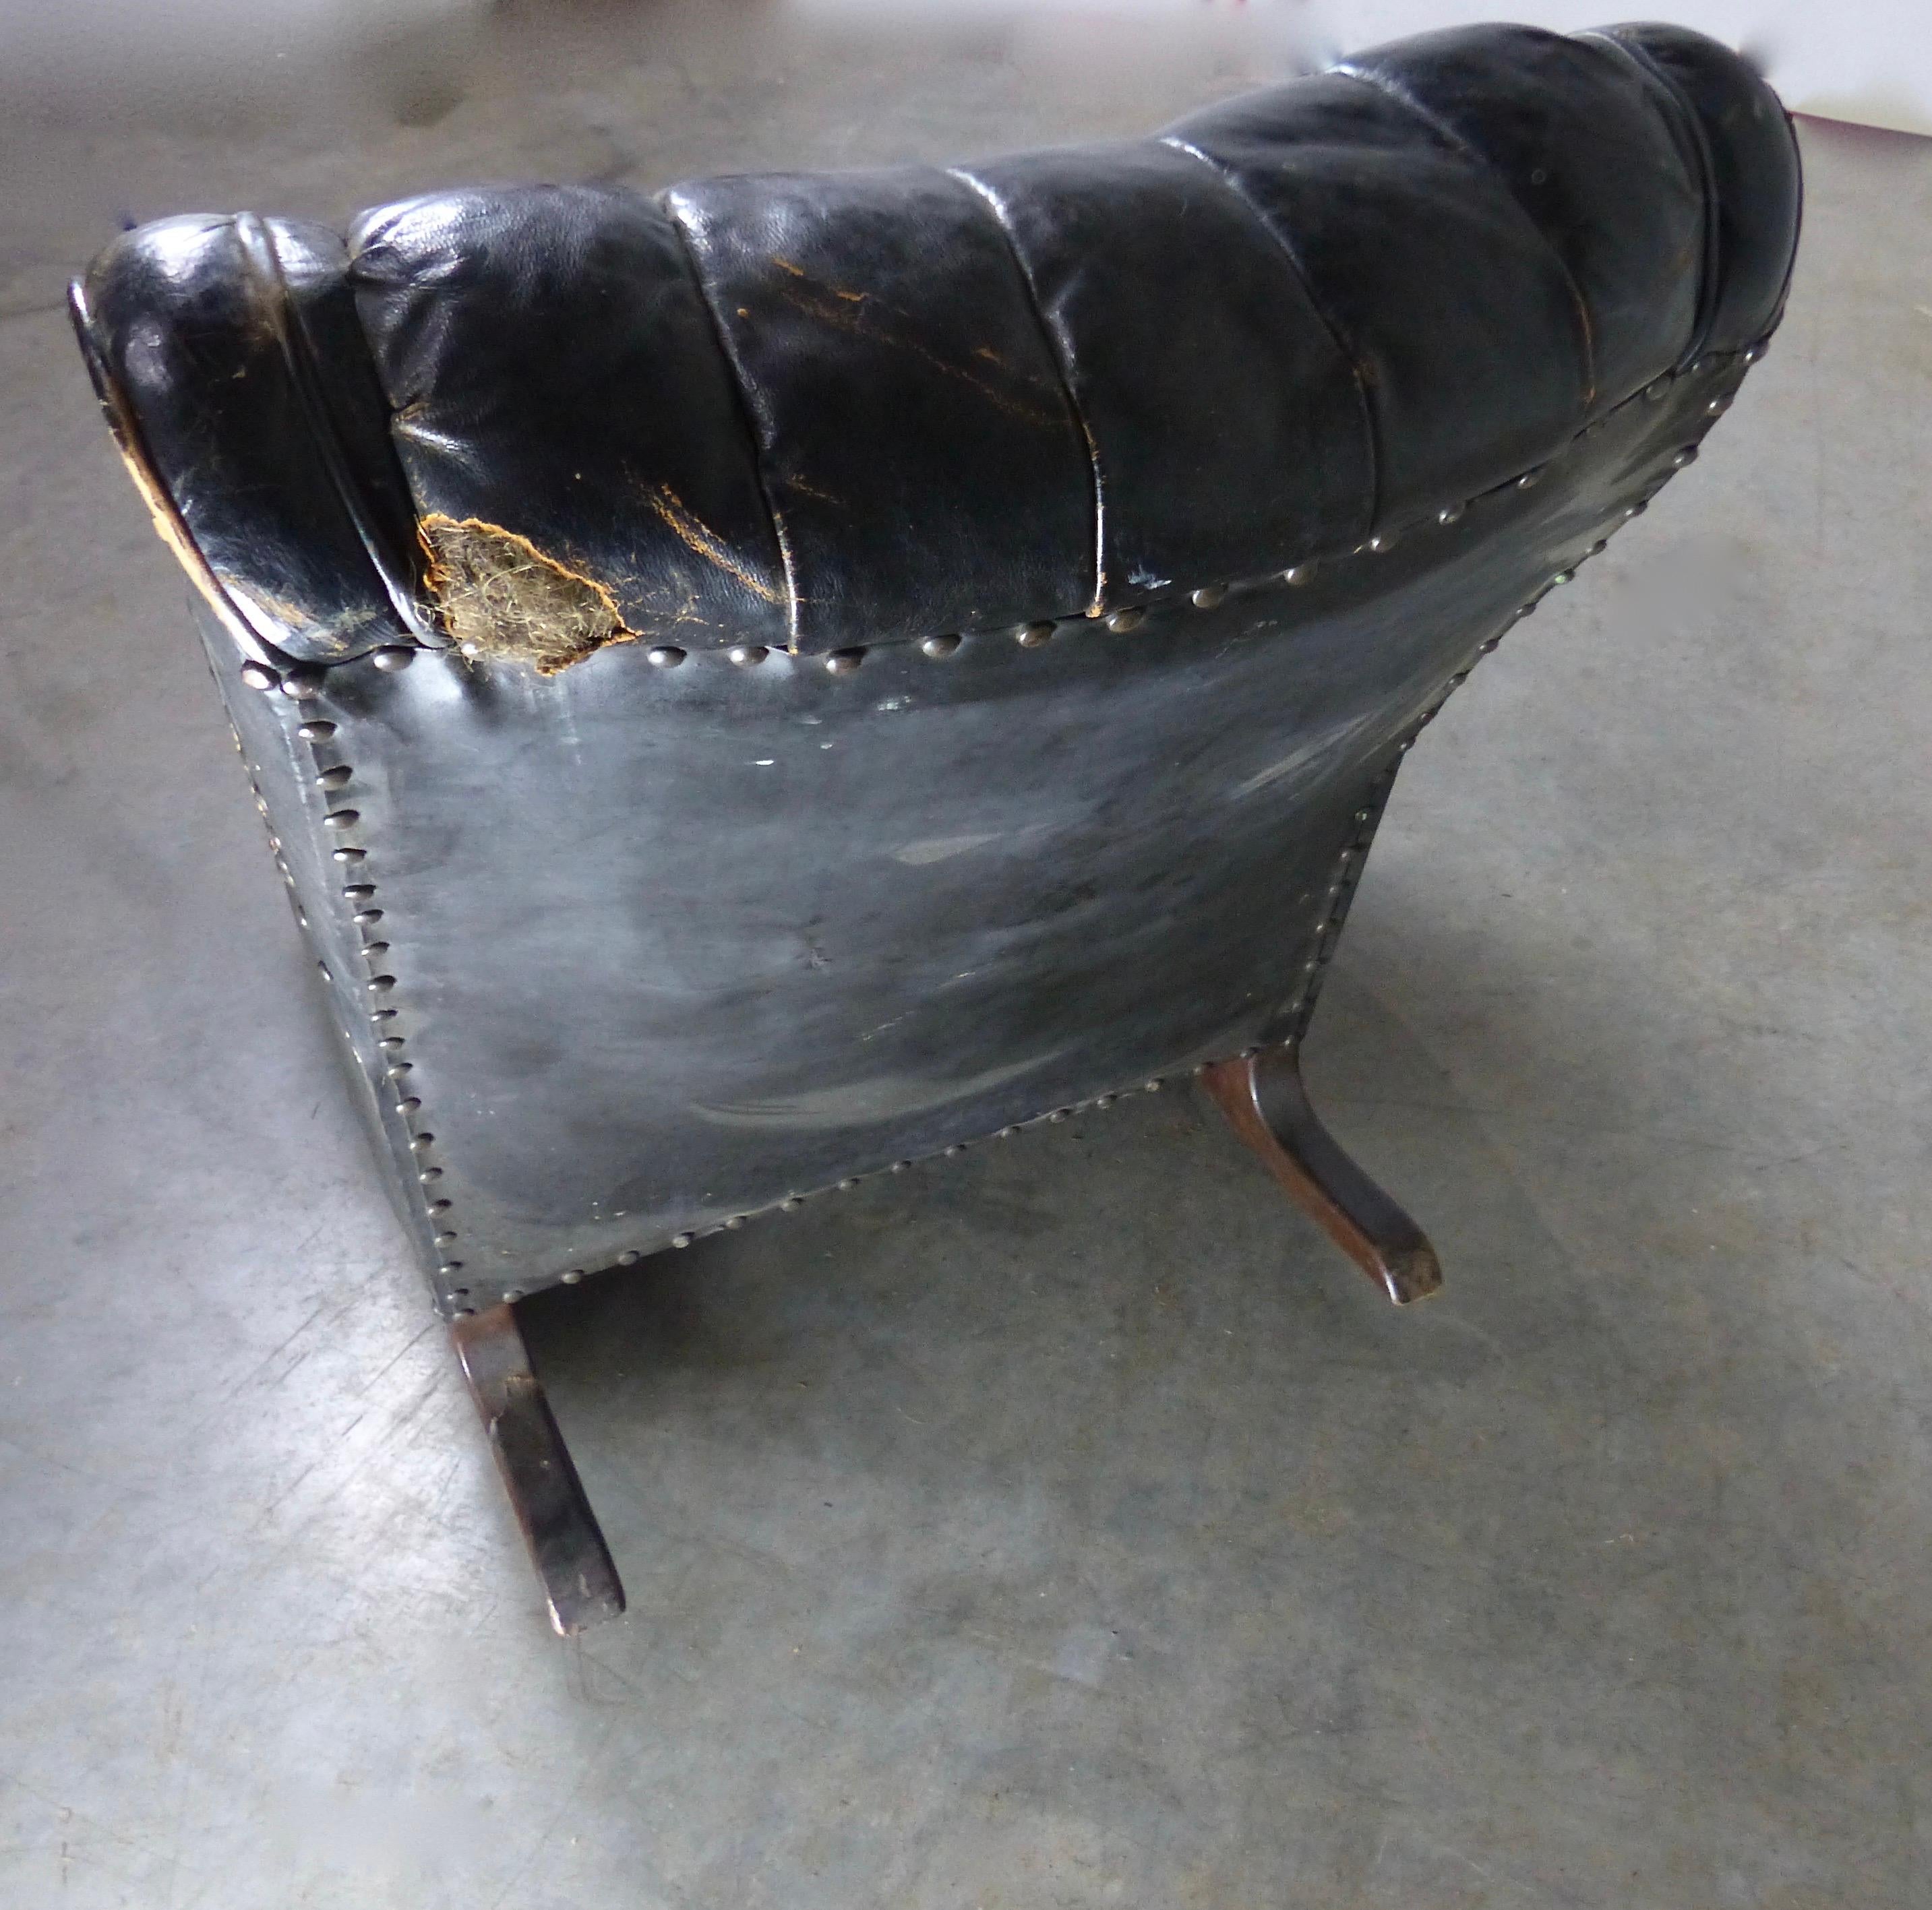 black leather rocking chair